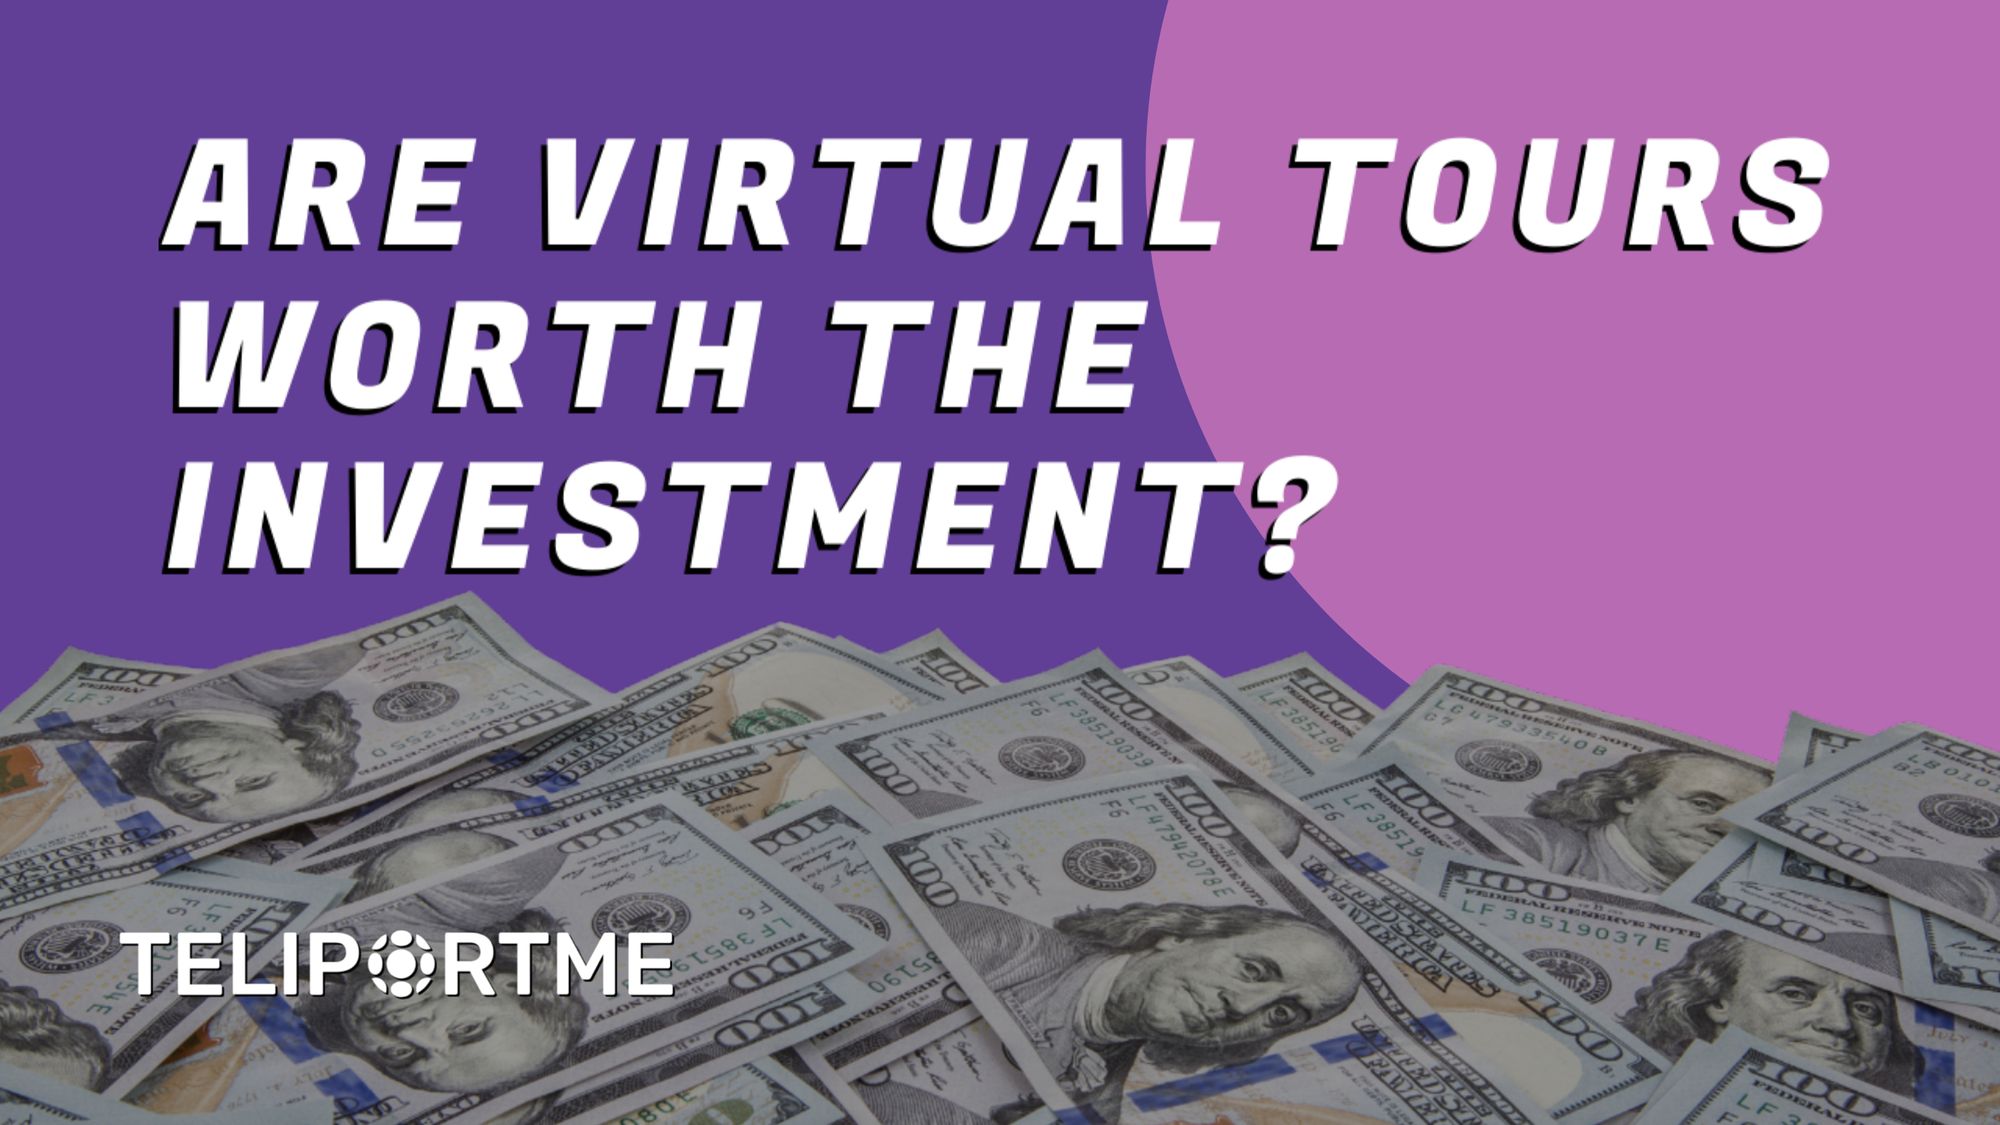 Are 3D virtual tours worth the investment ?